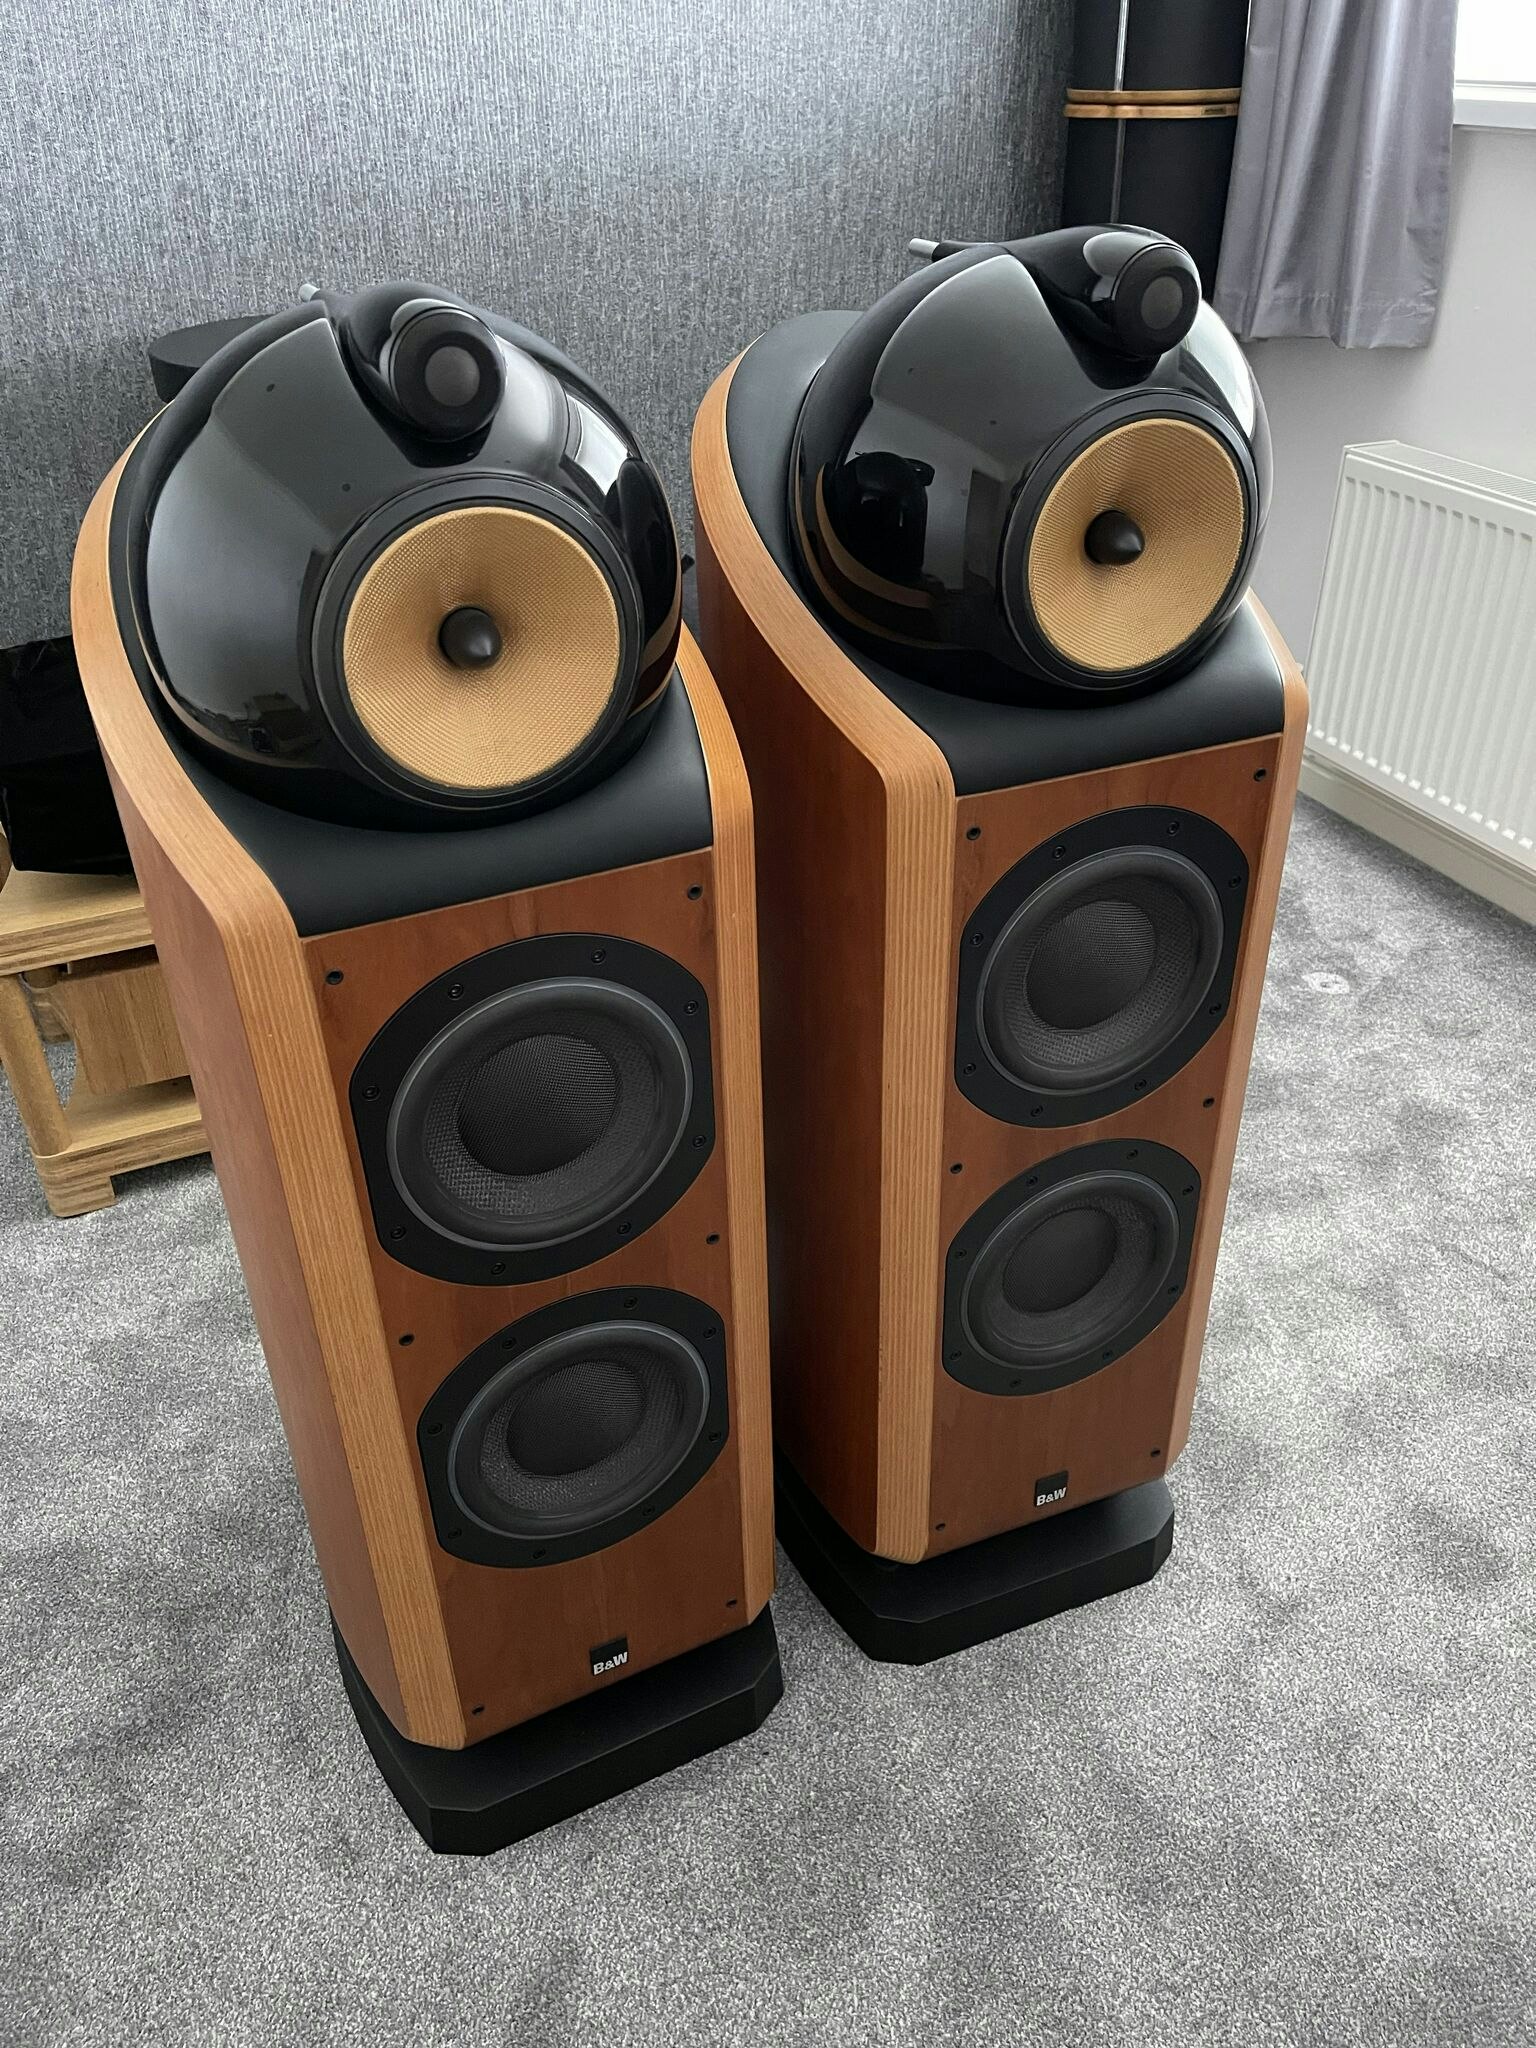 Bower & Wilkins 802D - PREOWNED - Akman Audio